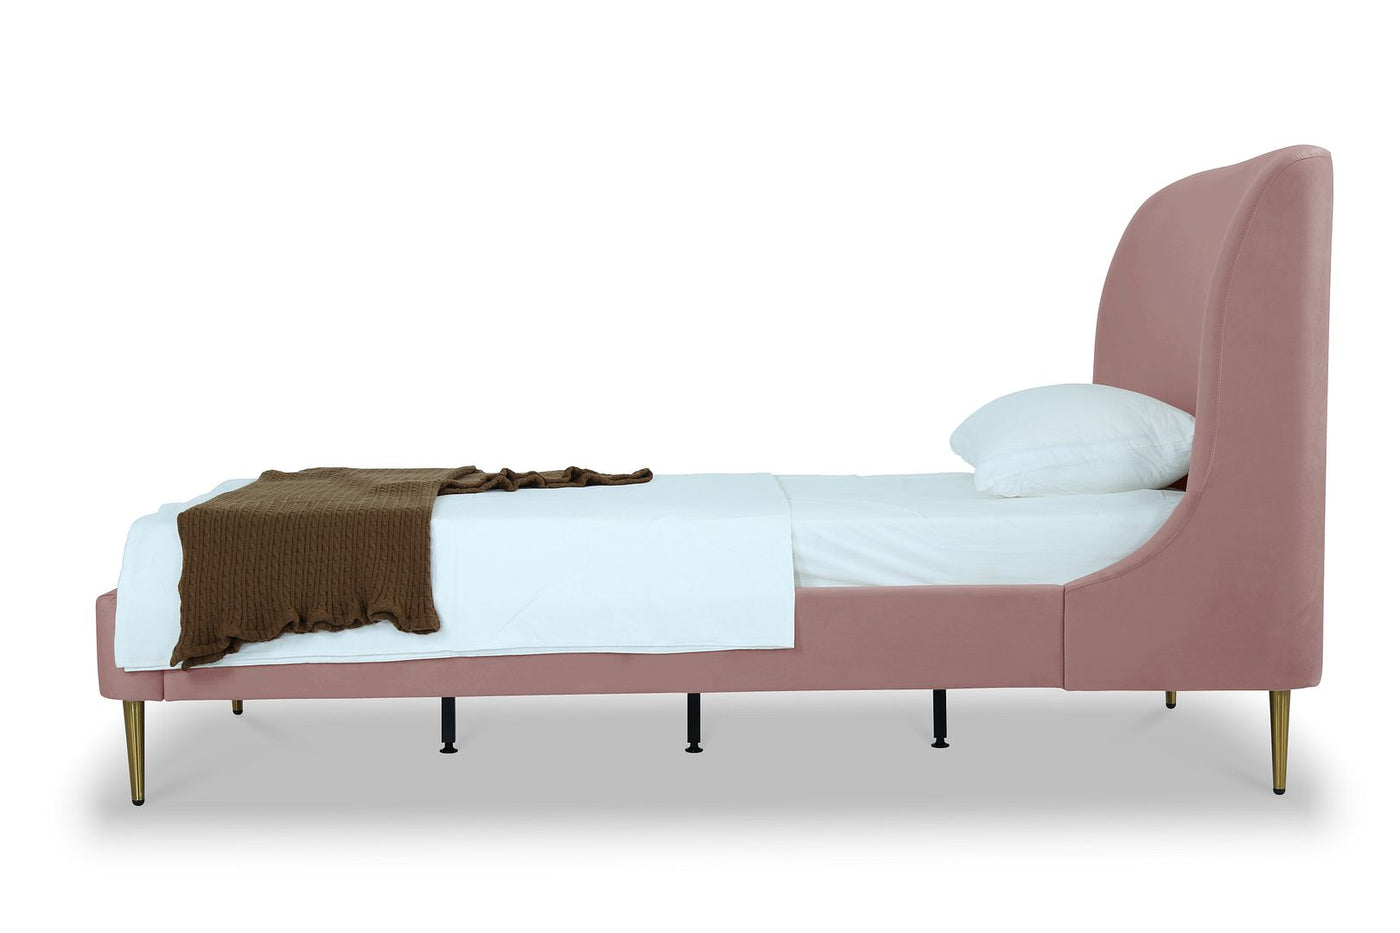 Stege Twin Bed - Blush with Gold Legs